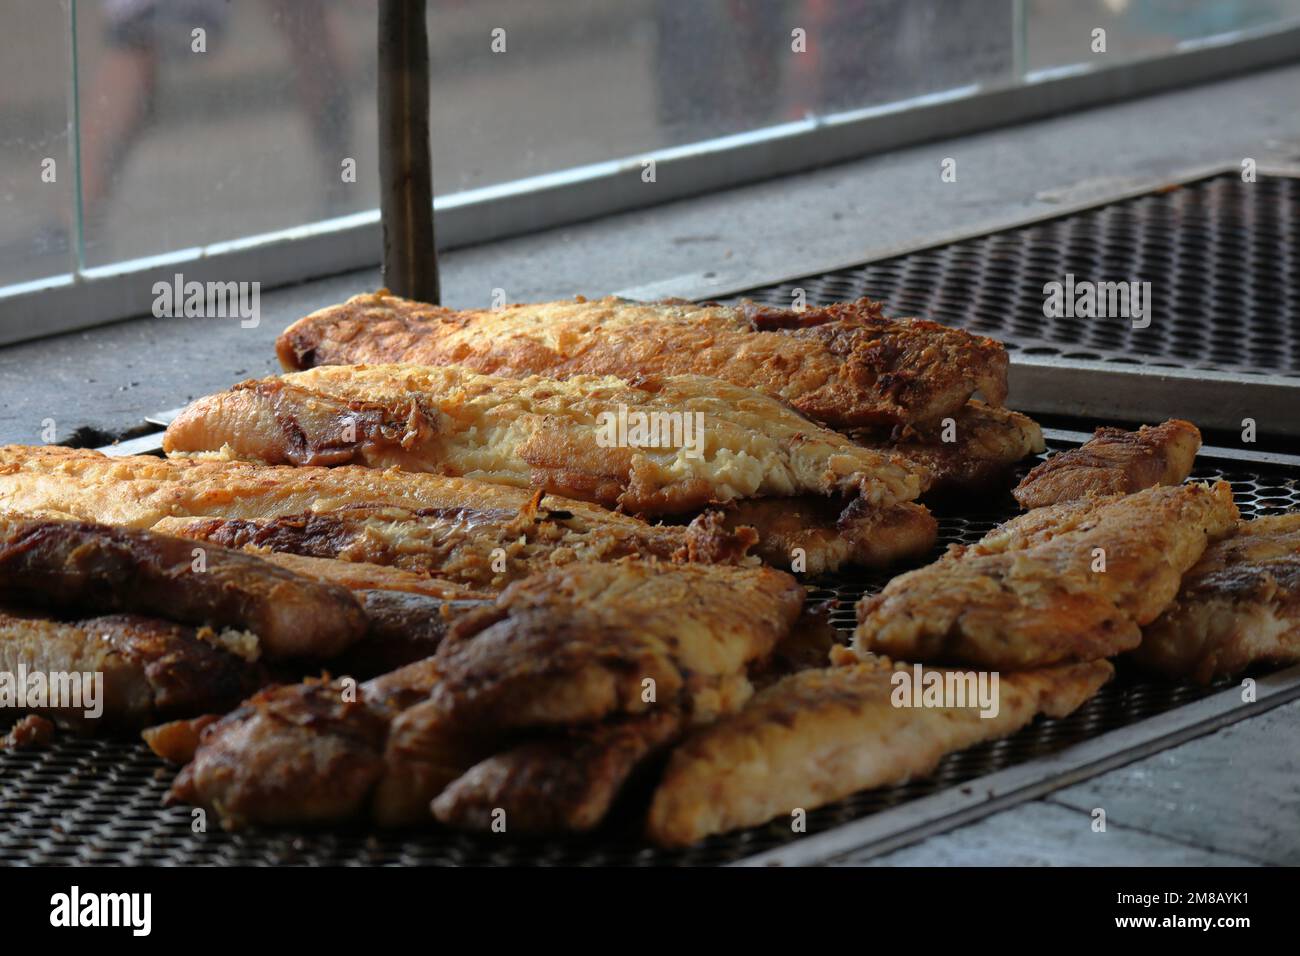 Grilled fish, typical and traditional Brazilian cuisine at Piracicaba, Sao Paulo. Stock Photo